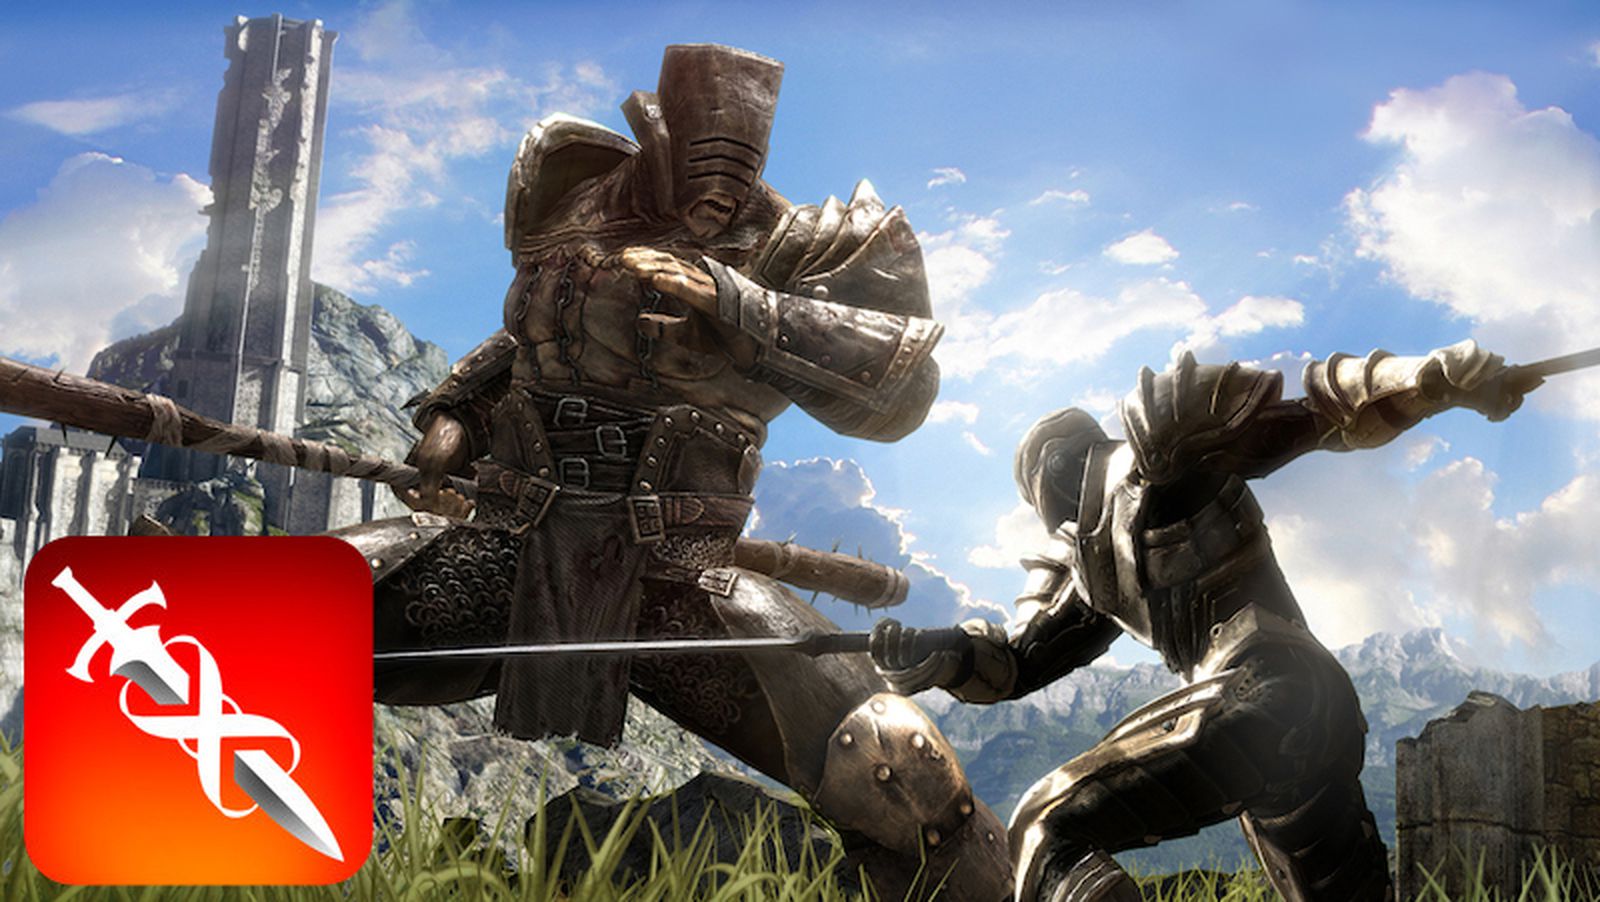 Epic Games Removes 'Infinity Blade' Trilogy From App Store - MacRumors